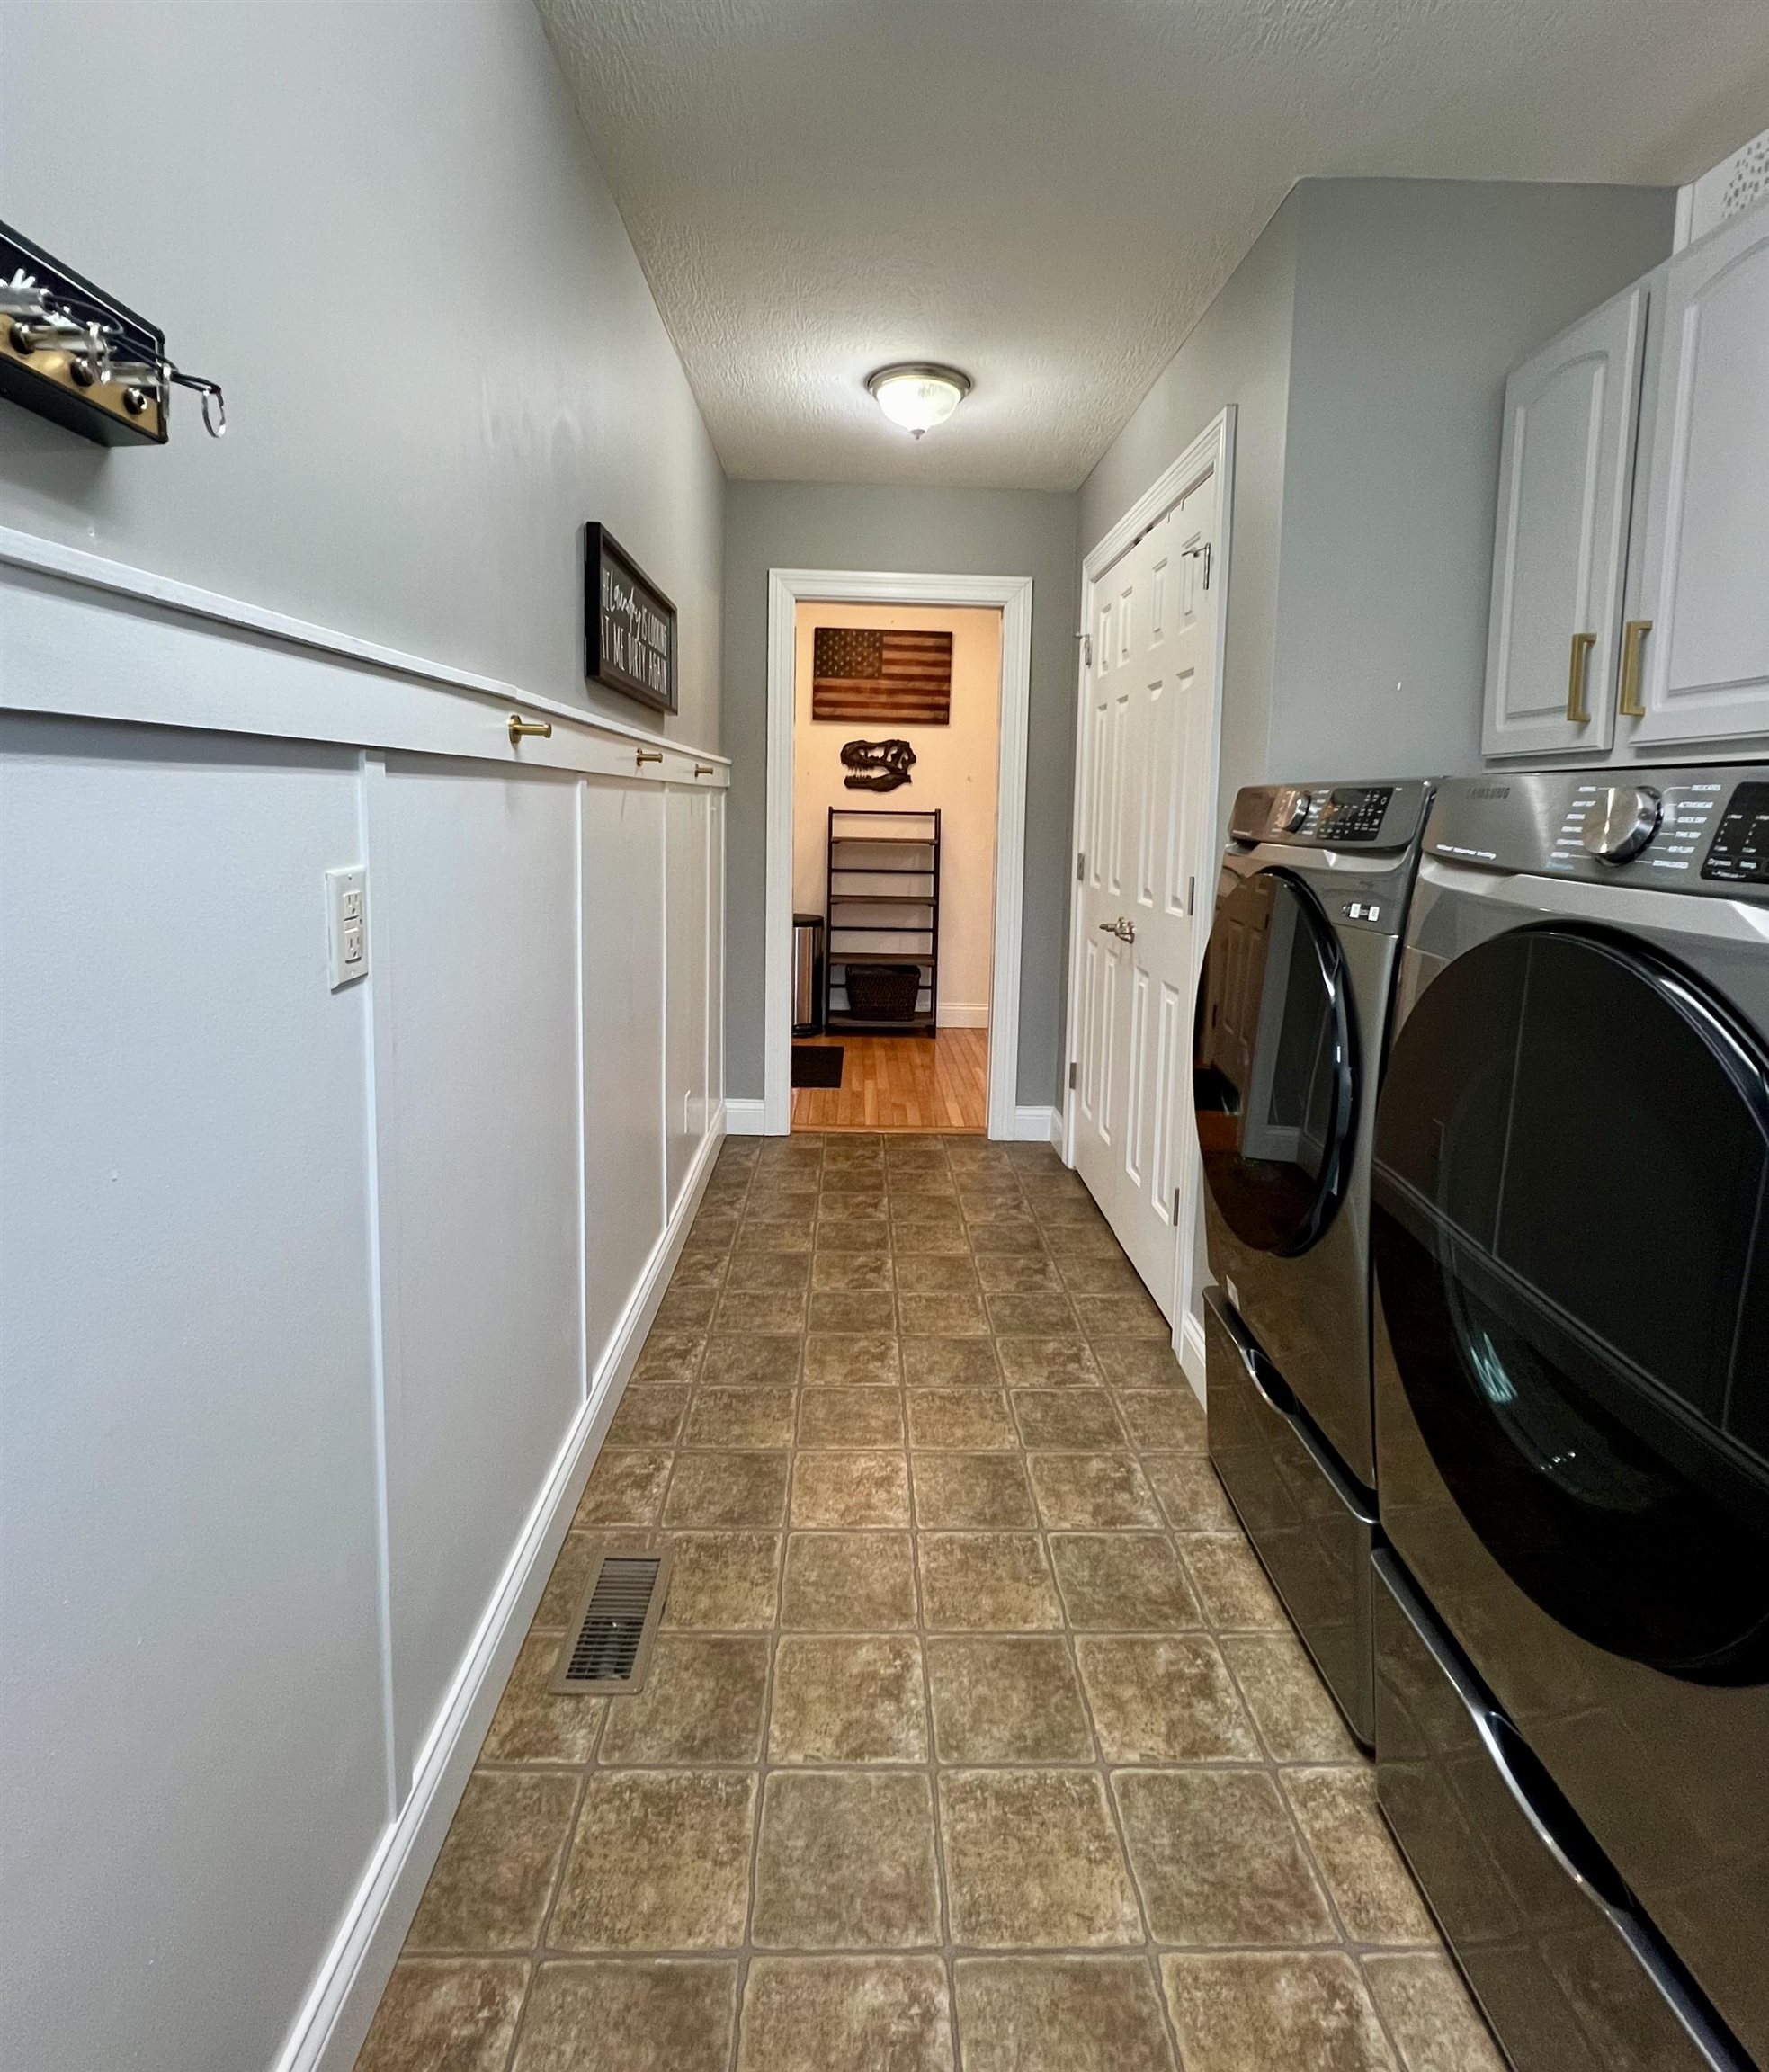 Includes utility closet and cabinetry and utility sink.